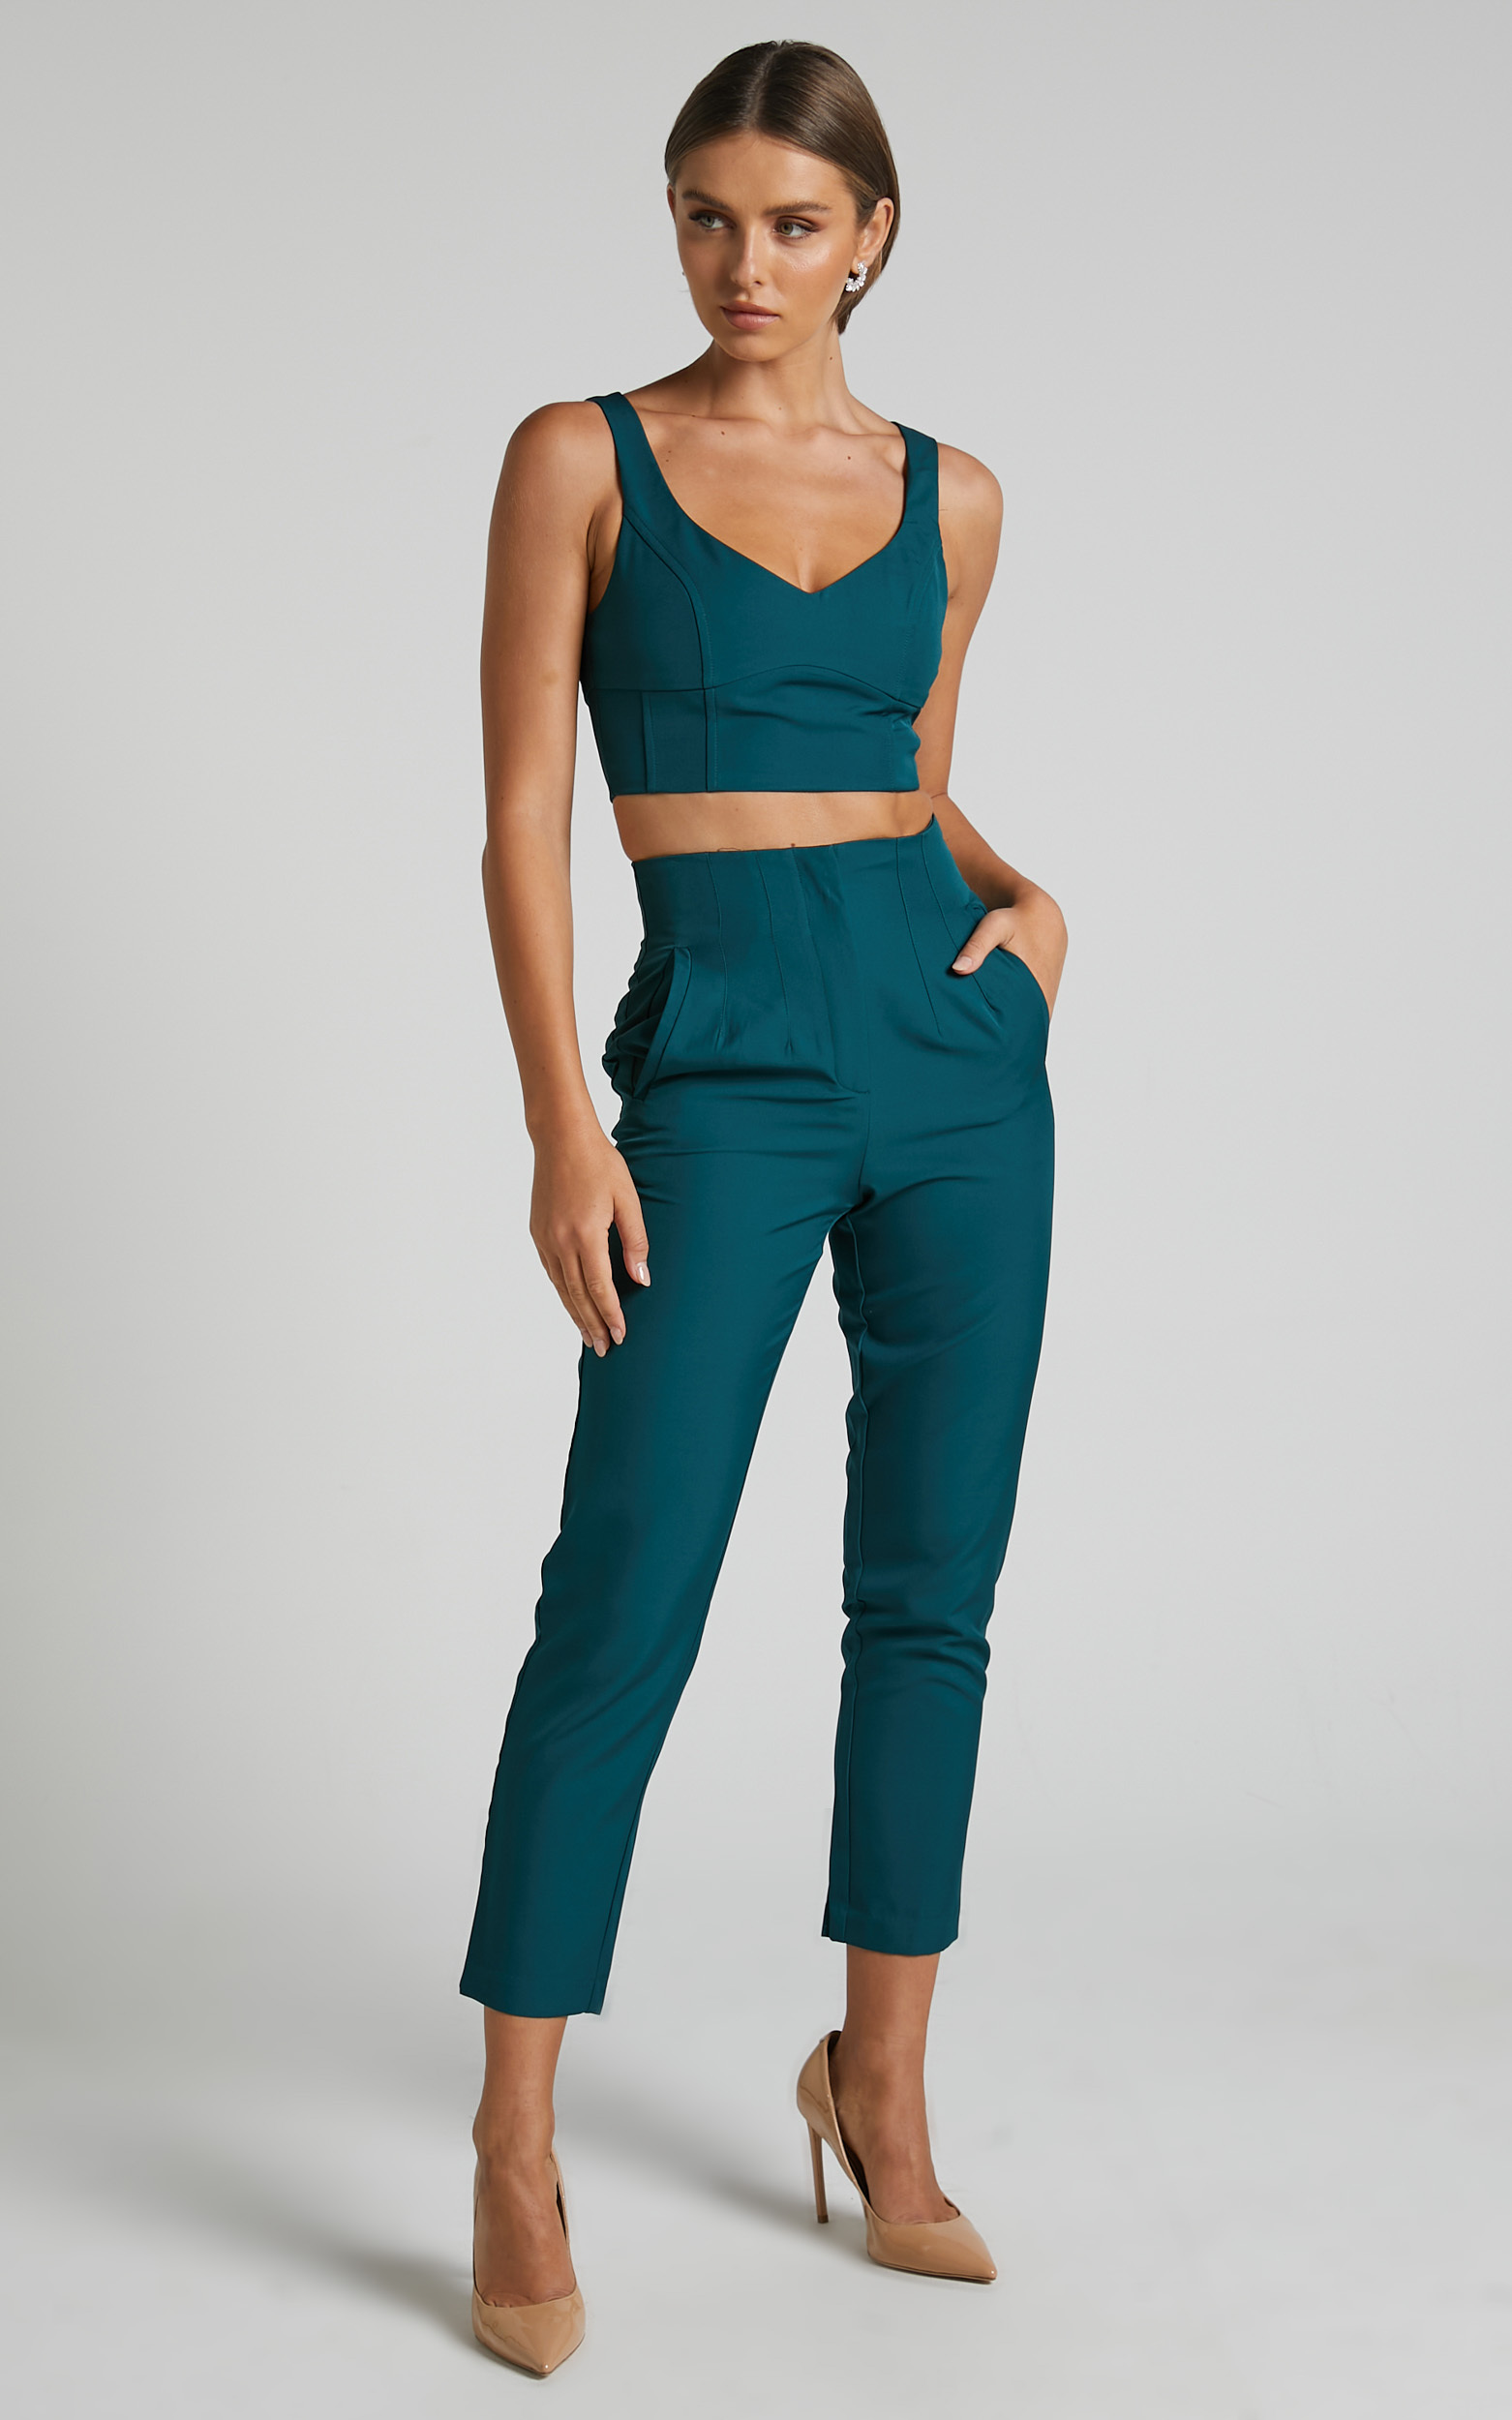 Armanda Two Piece Set - Crop Top and High Waisted Straight Leg Pants in Deep Green - 04, GRN1, hi-res image number null